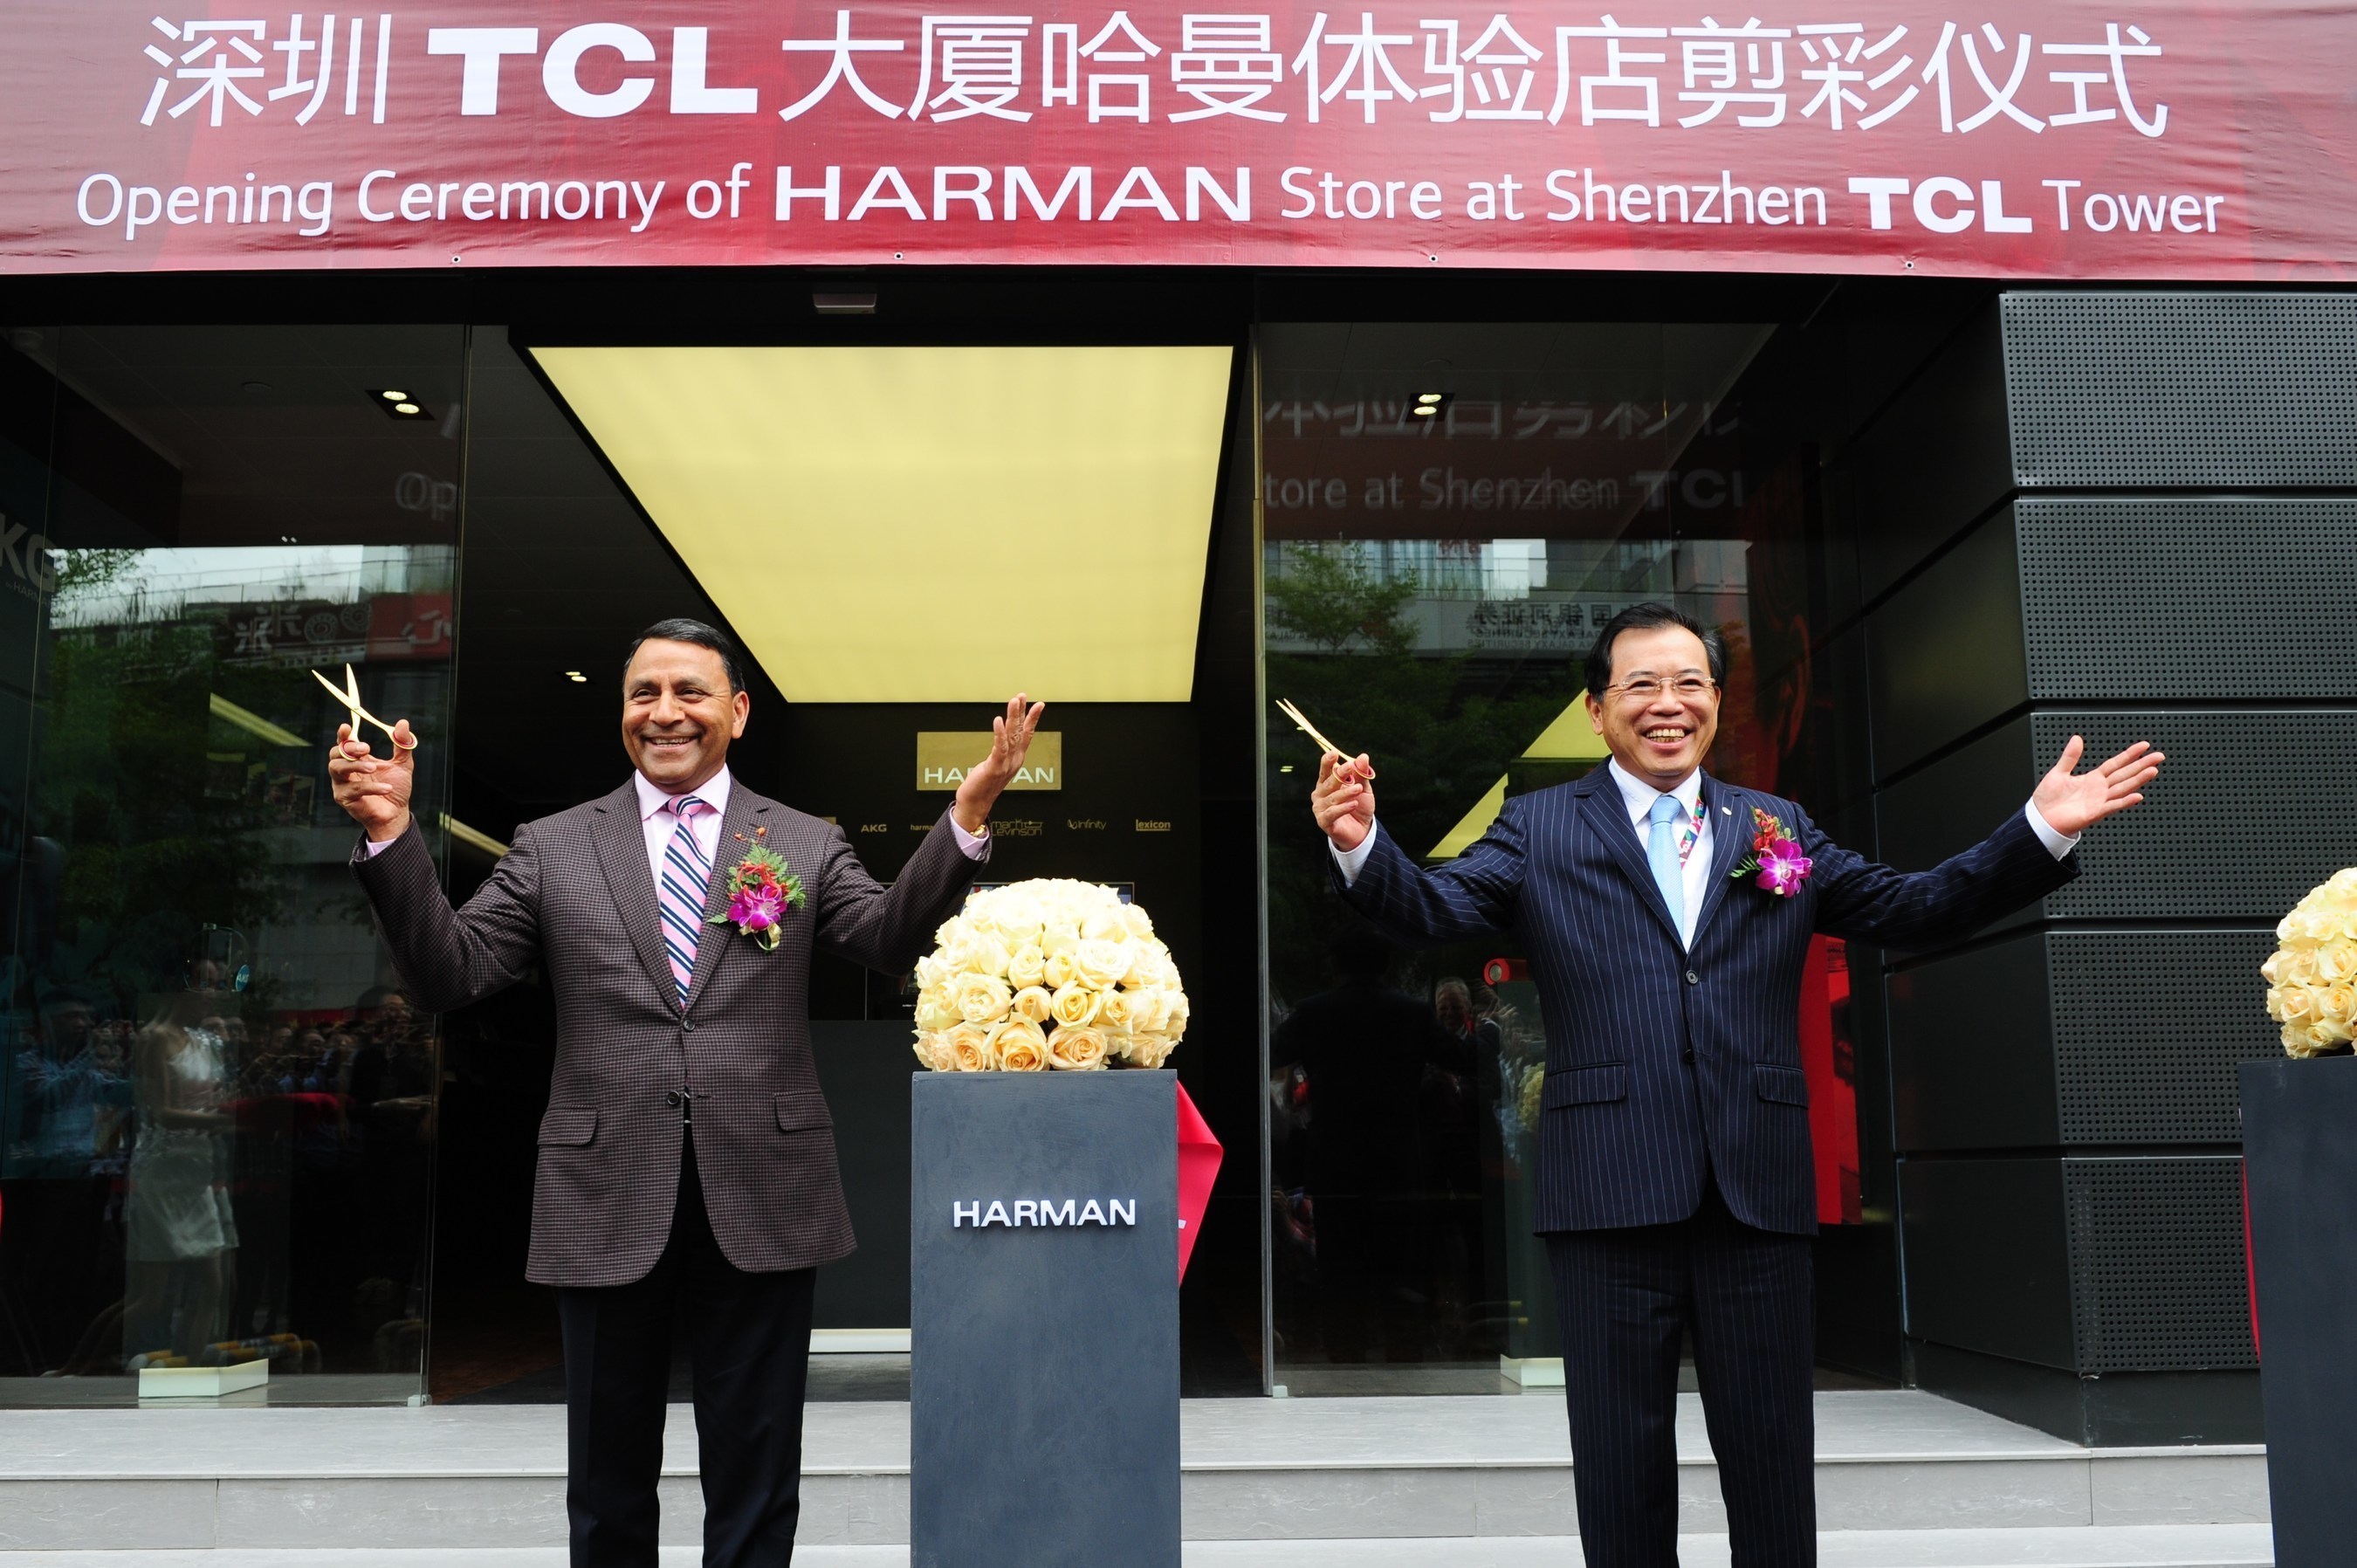 TCL Corporation’s Chairman Li Dongsheng and Harman International’s Chairman Dinesh Paliwal attended the ceremony together, representing the start of a comprehensive partnership between the two corporations.